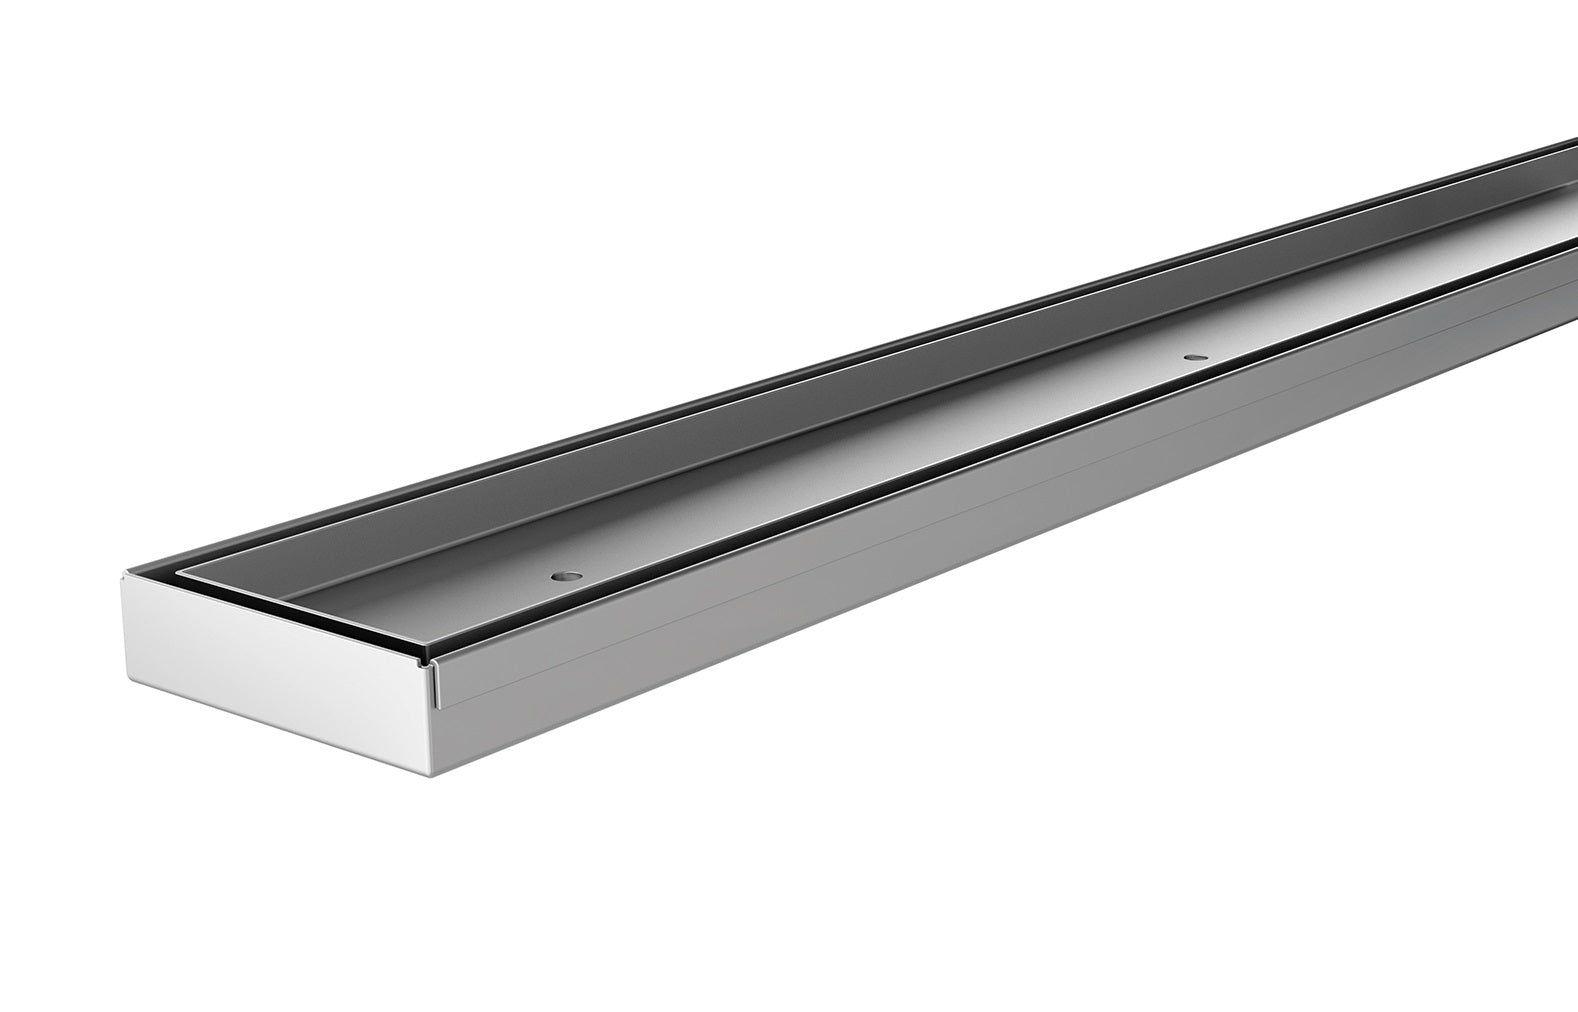 PHOENIX FLAT STAINLESS STEEL 45MM CHANNEL DRAIN TI 75 OUTLET 600MM, 750MM, 900MM AND 1200MM